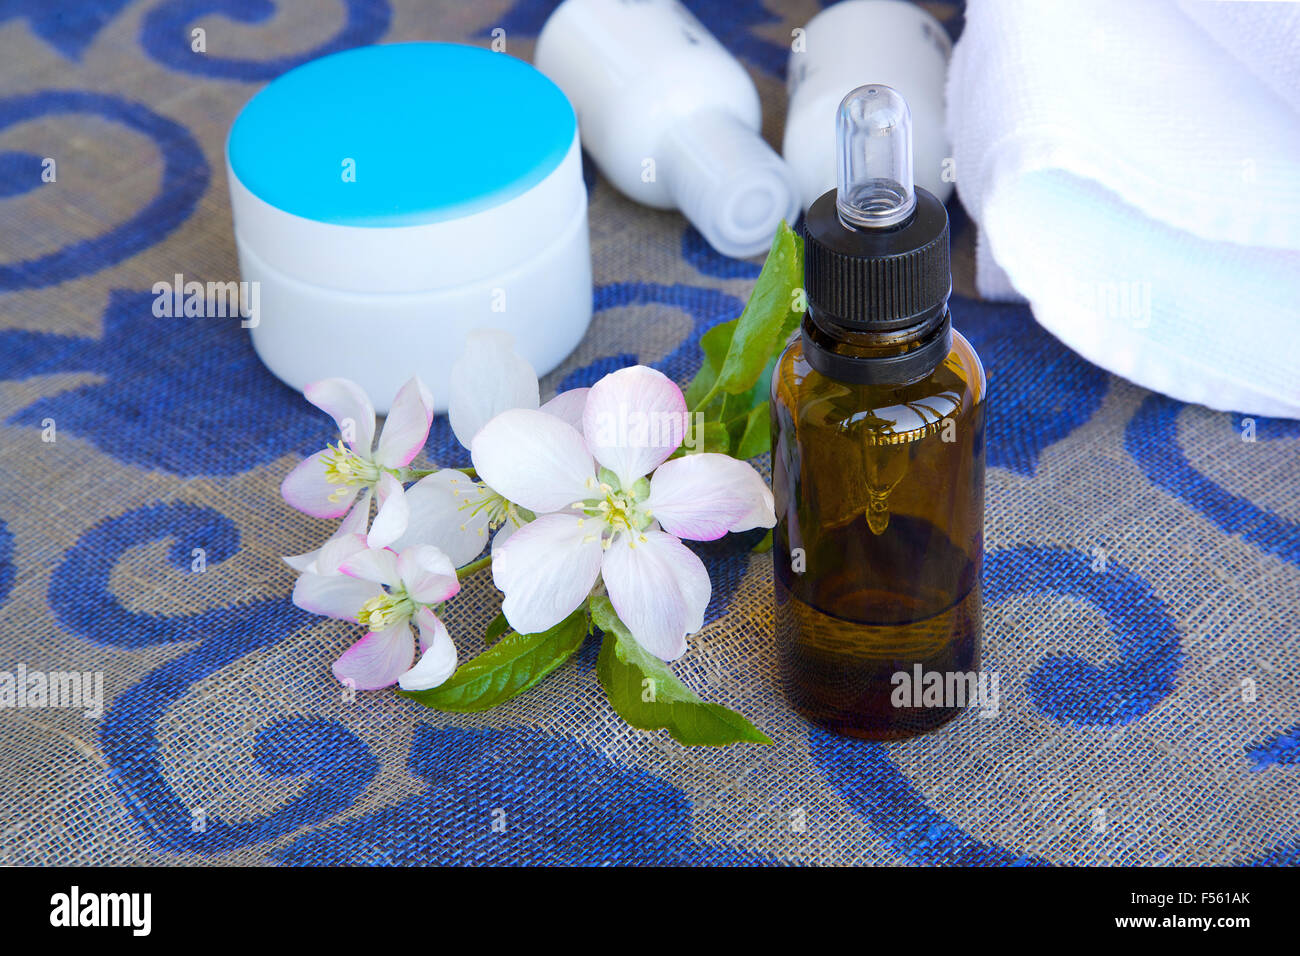 A dropper bottle of apple blossoms extract and apple blossoms on a sack cloth. Cream box,body lotion,white towels in the backgro Stock Photo